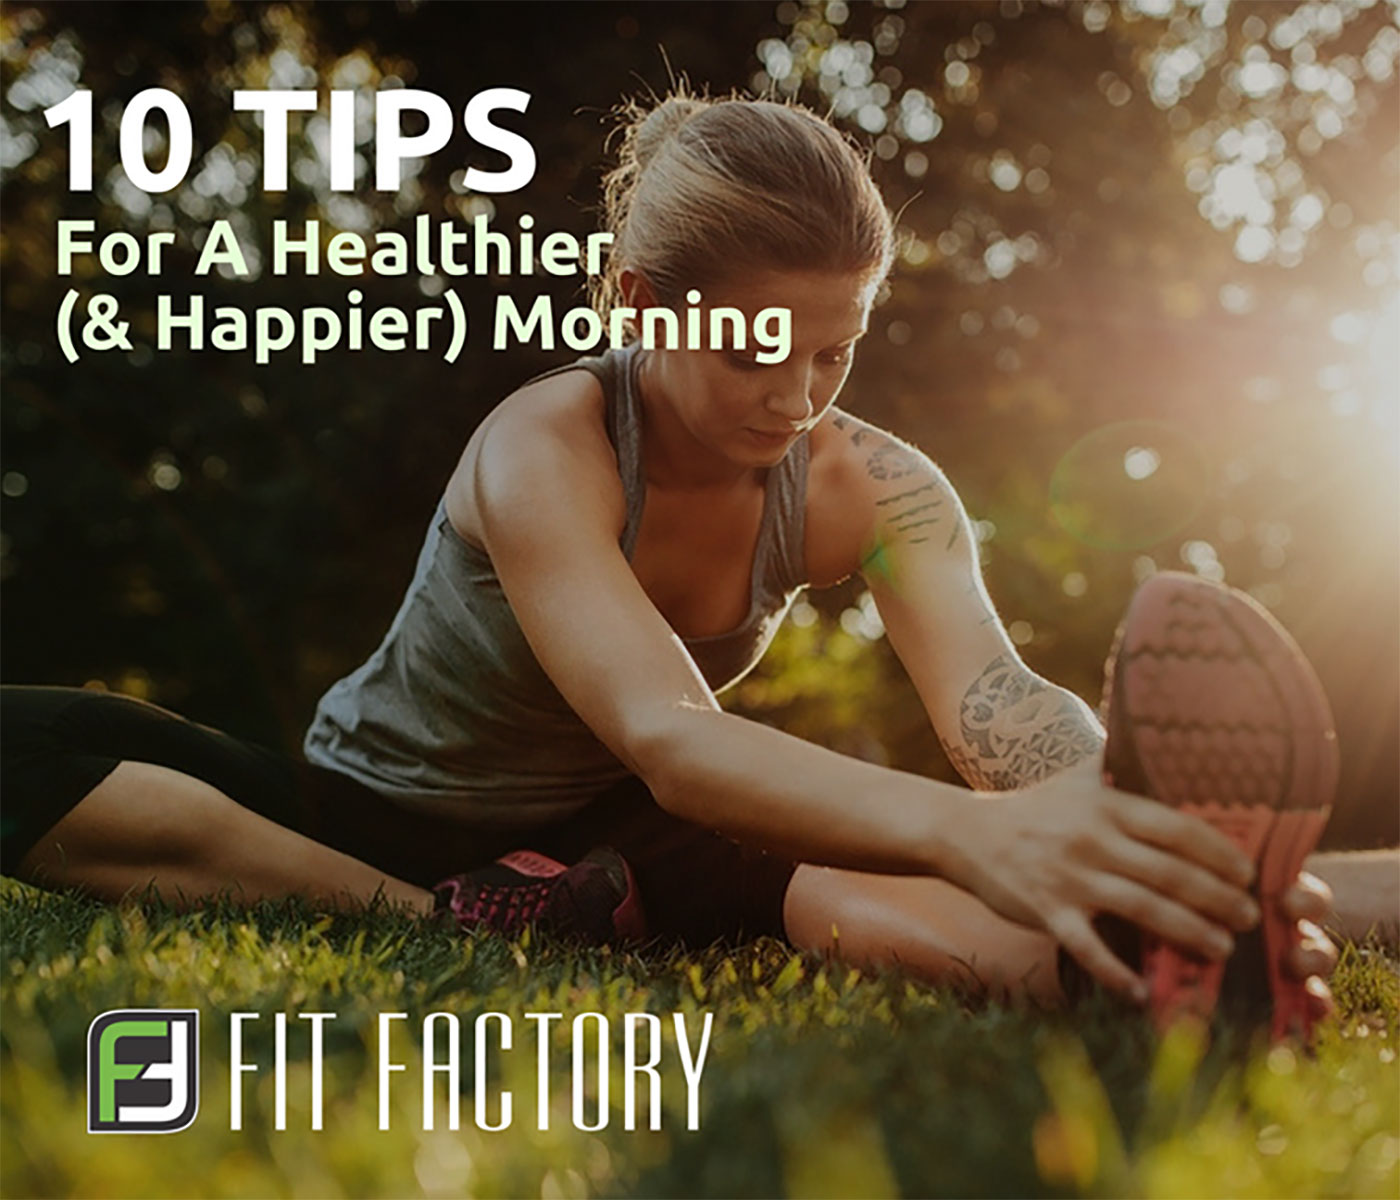 10 Tips for a Healthier (and Happier) Morning